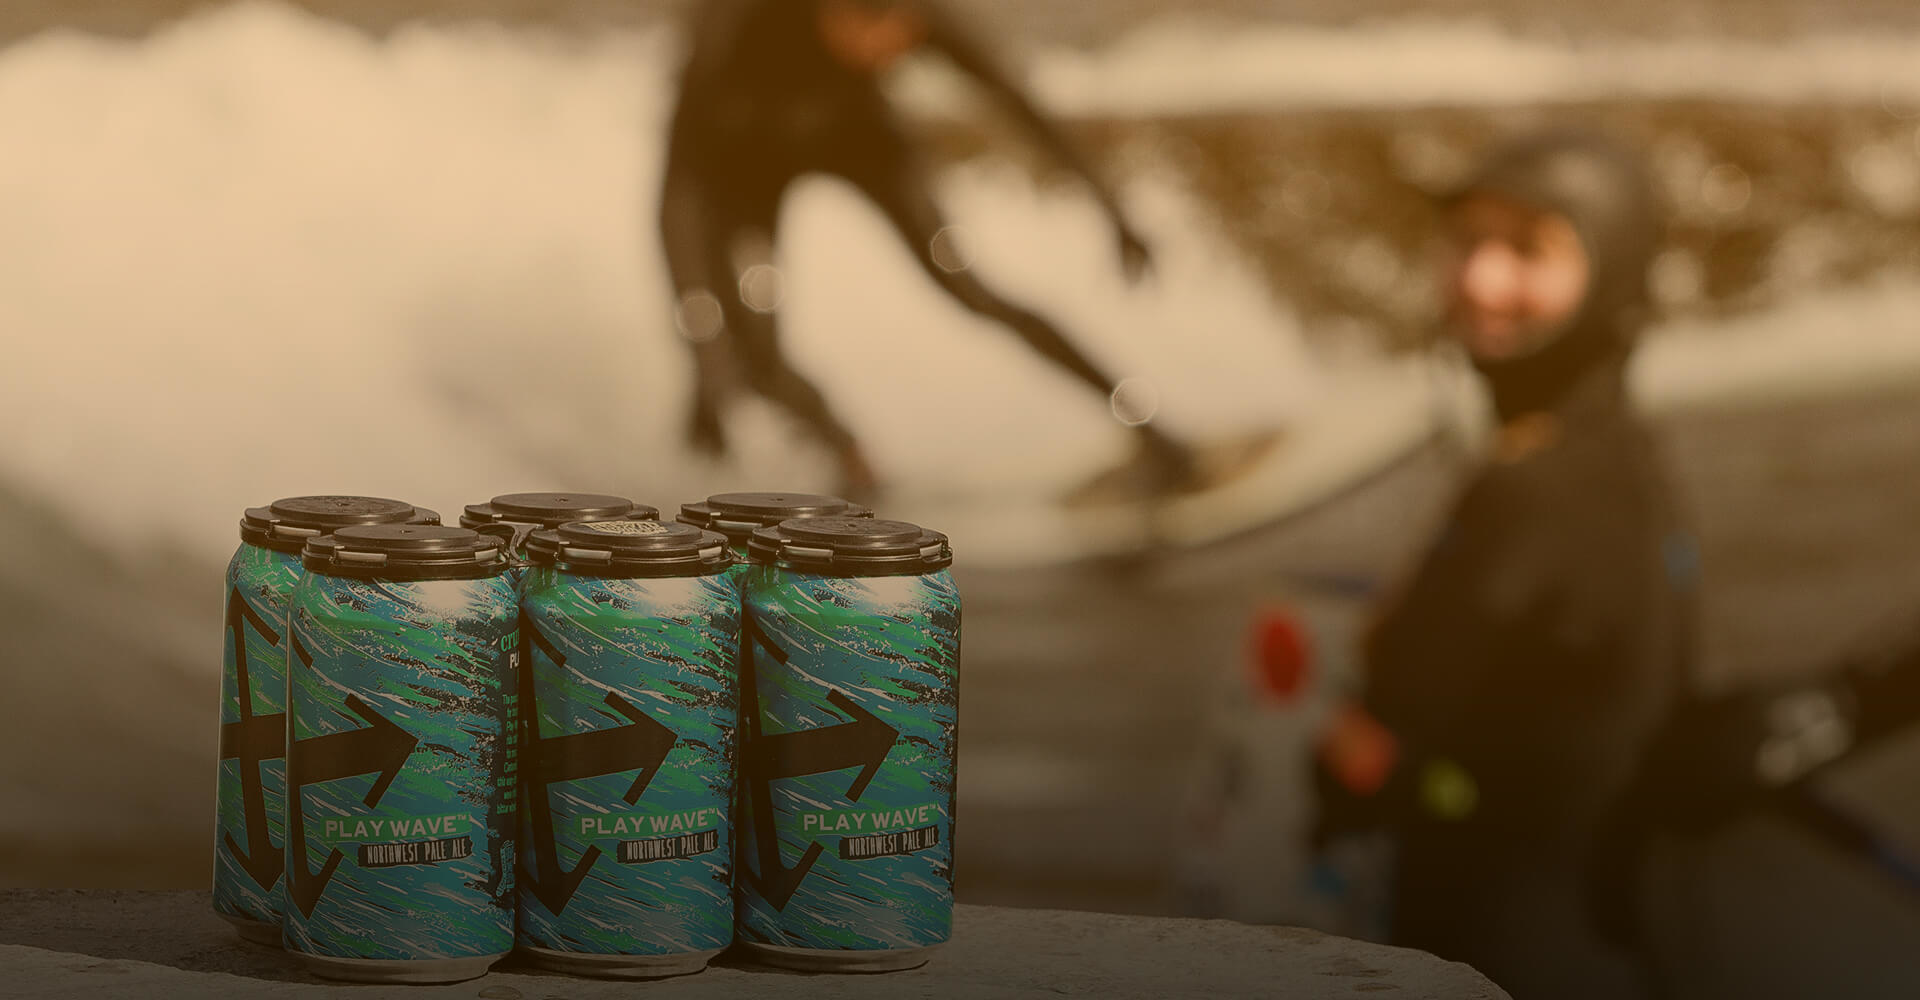 Play Wave cans with surfers in the background